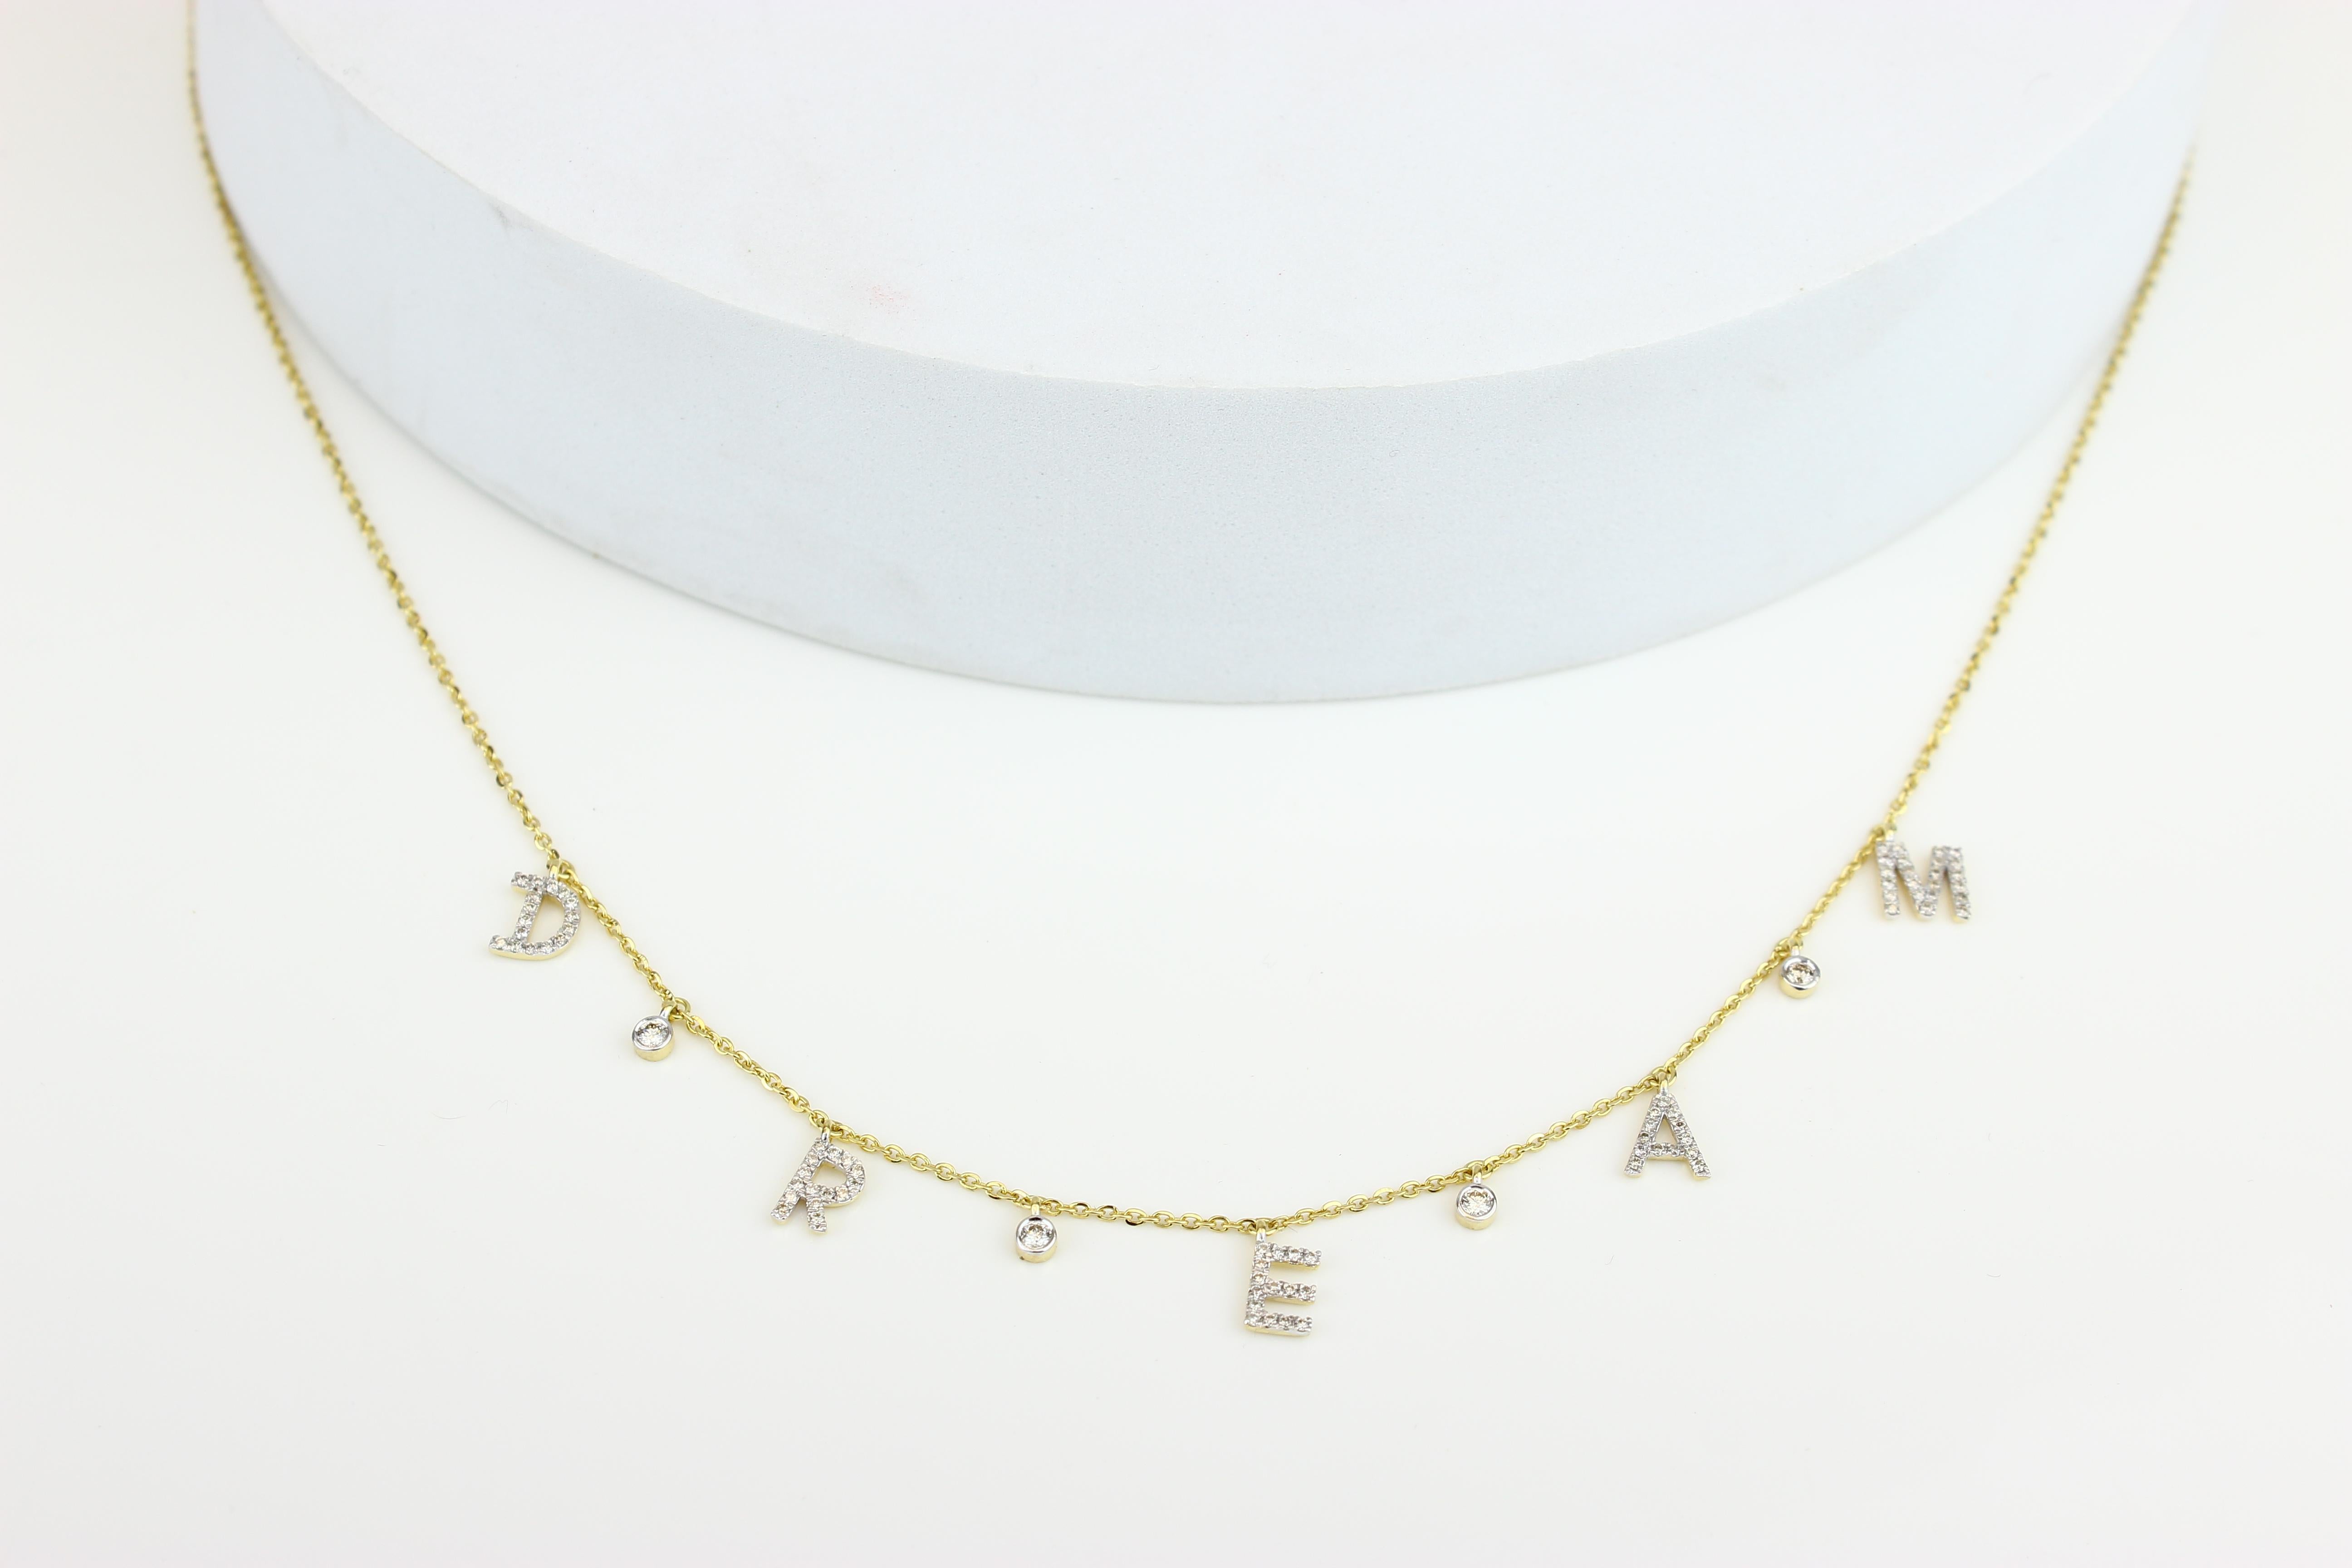 The Diamond Love Necklace is a stylish symbol of hope and inspiration, made of gold and diamonds. Each letter is uniquely styled with a modern font and studded with diamonds. The pendant is arranged on a gold chain with diamond-studded charms for a